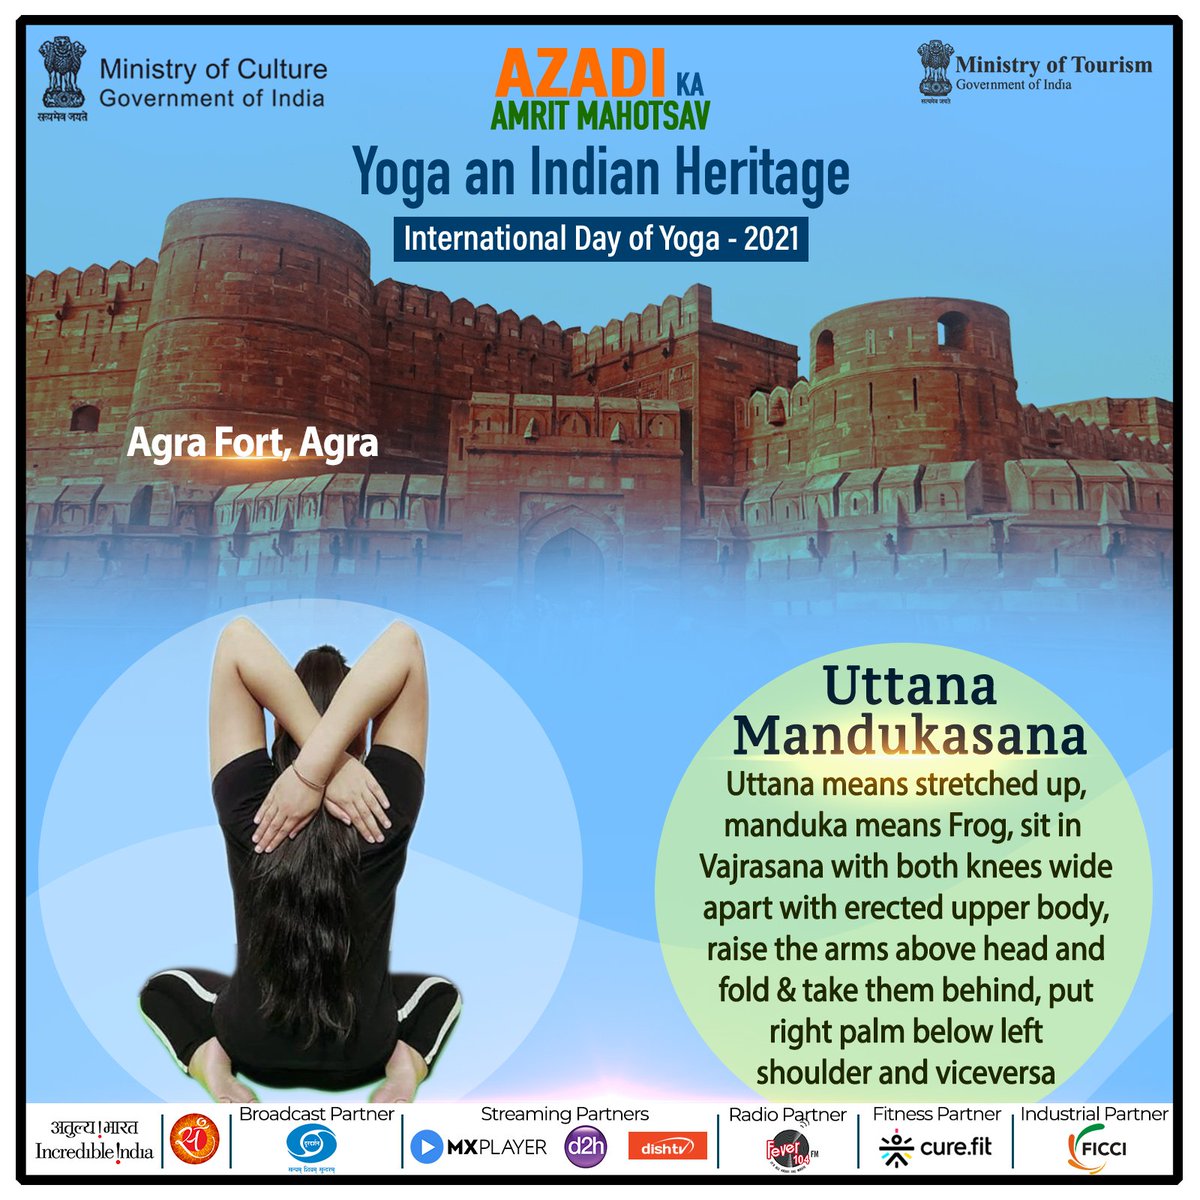 Uttana Mandukasana- Yoga is a gift of Indian Heritage to the whole world. Uttana means stretched up and Manduka means Frog. This posture helps to reduce backache , improves blood circulation and functioning of lungs.  #YogaAnIndianHeritage